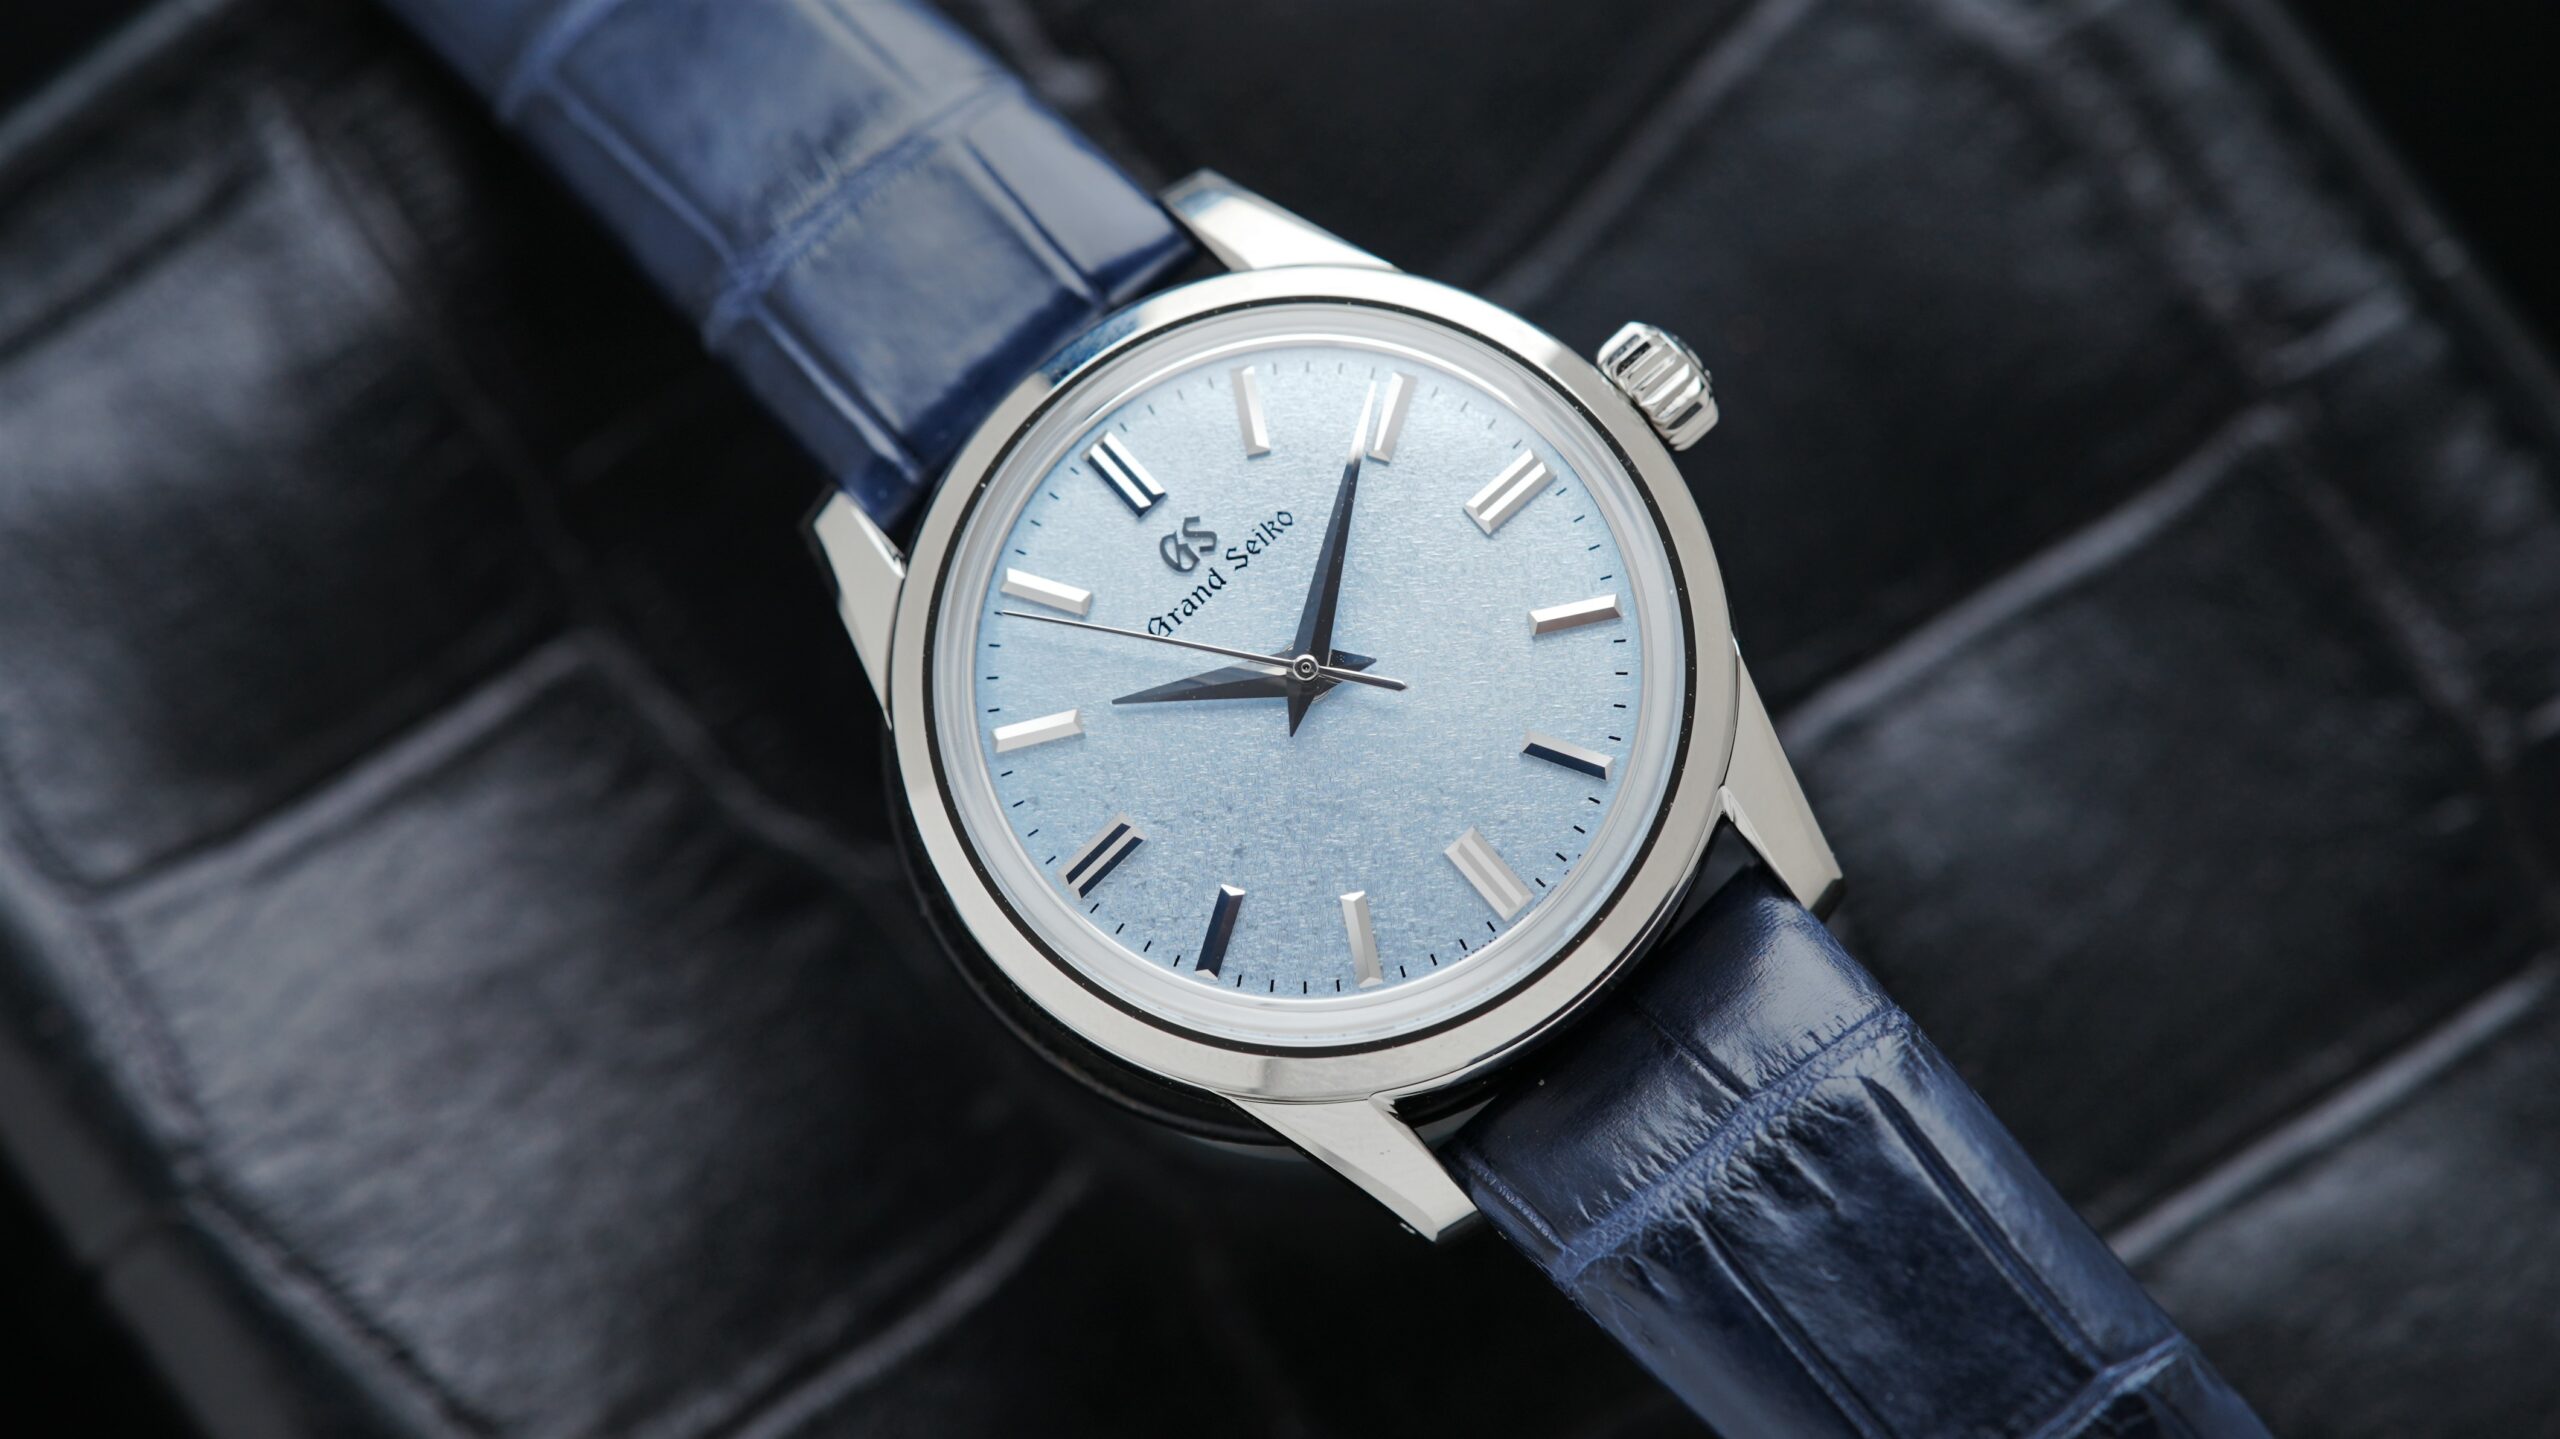 Elegant Grand Seiko watch with Ice Blue Dial angle shot under white light.